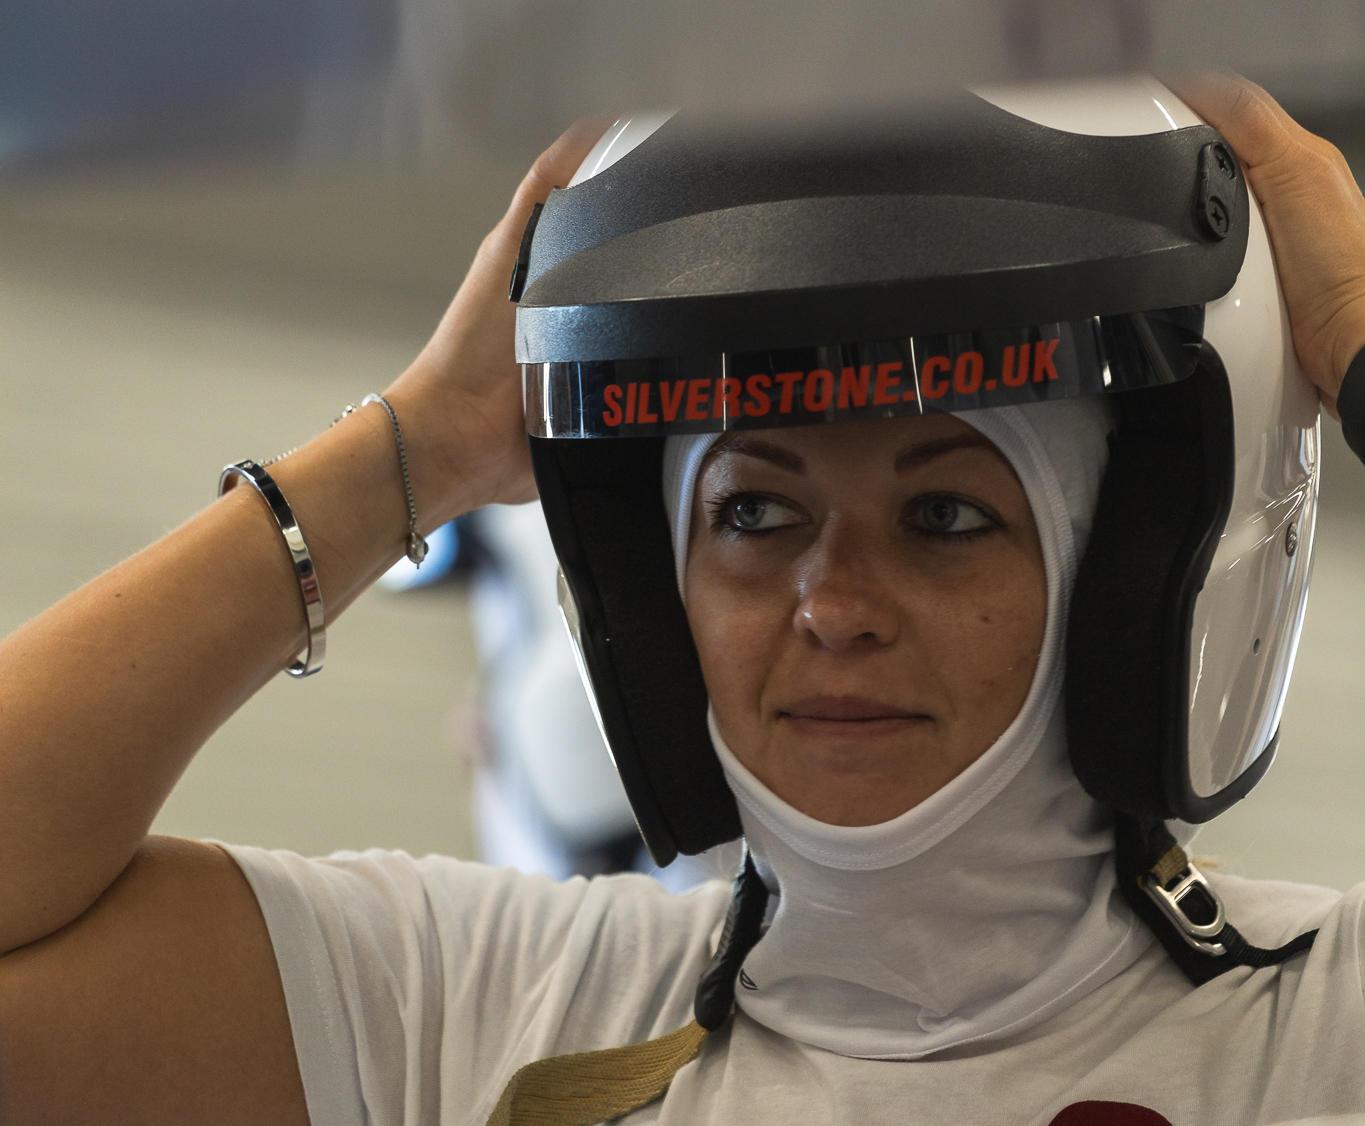 A lady puts on her helmet